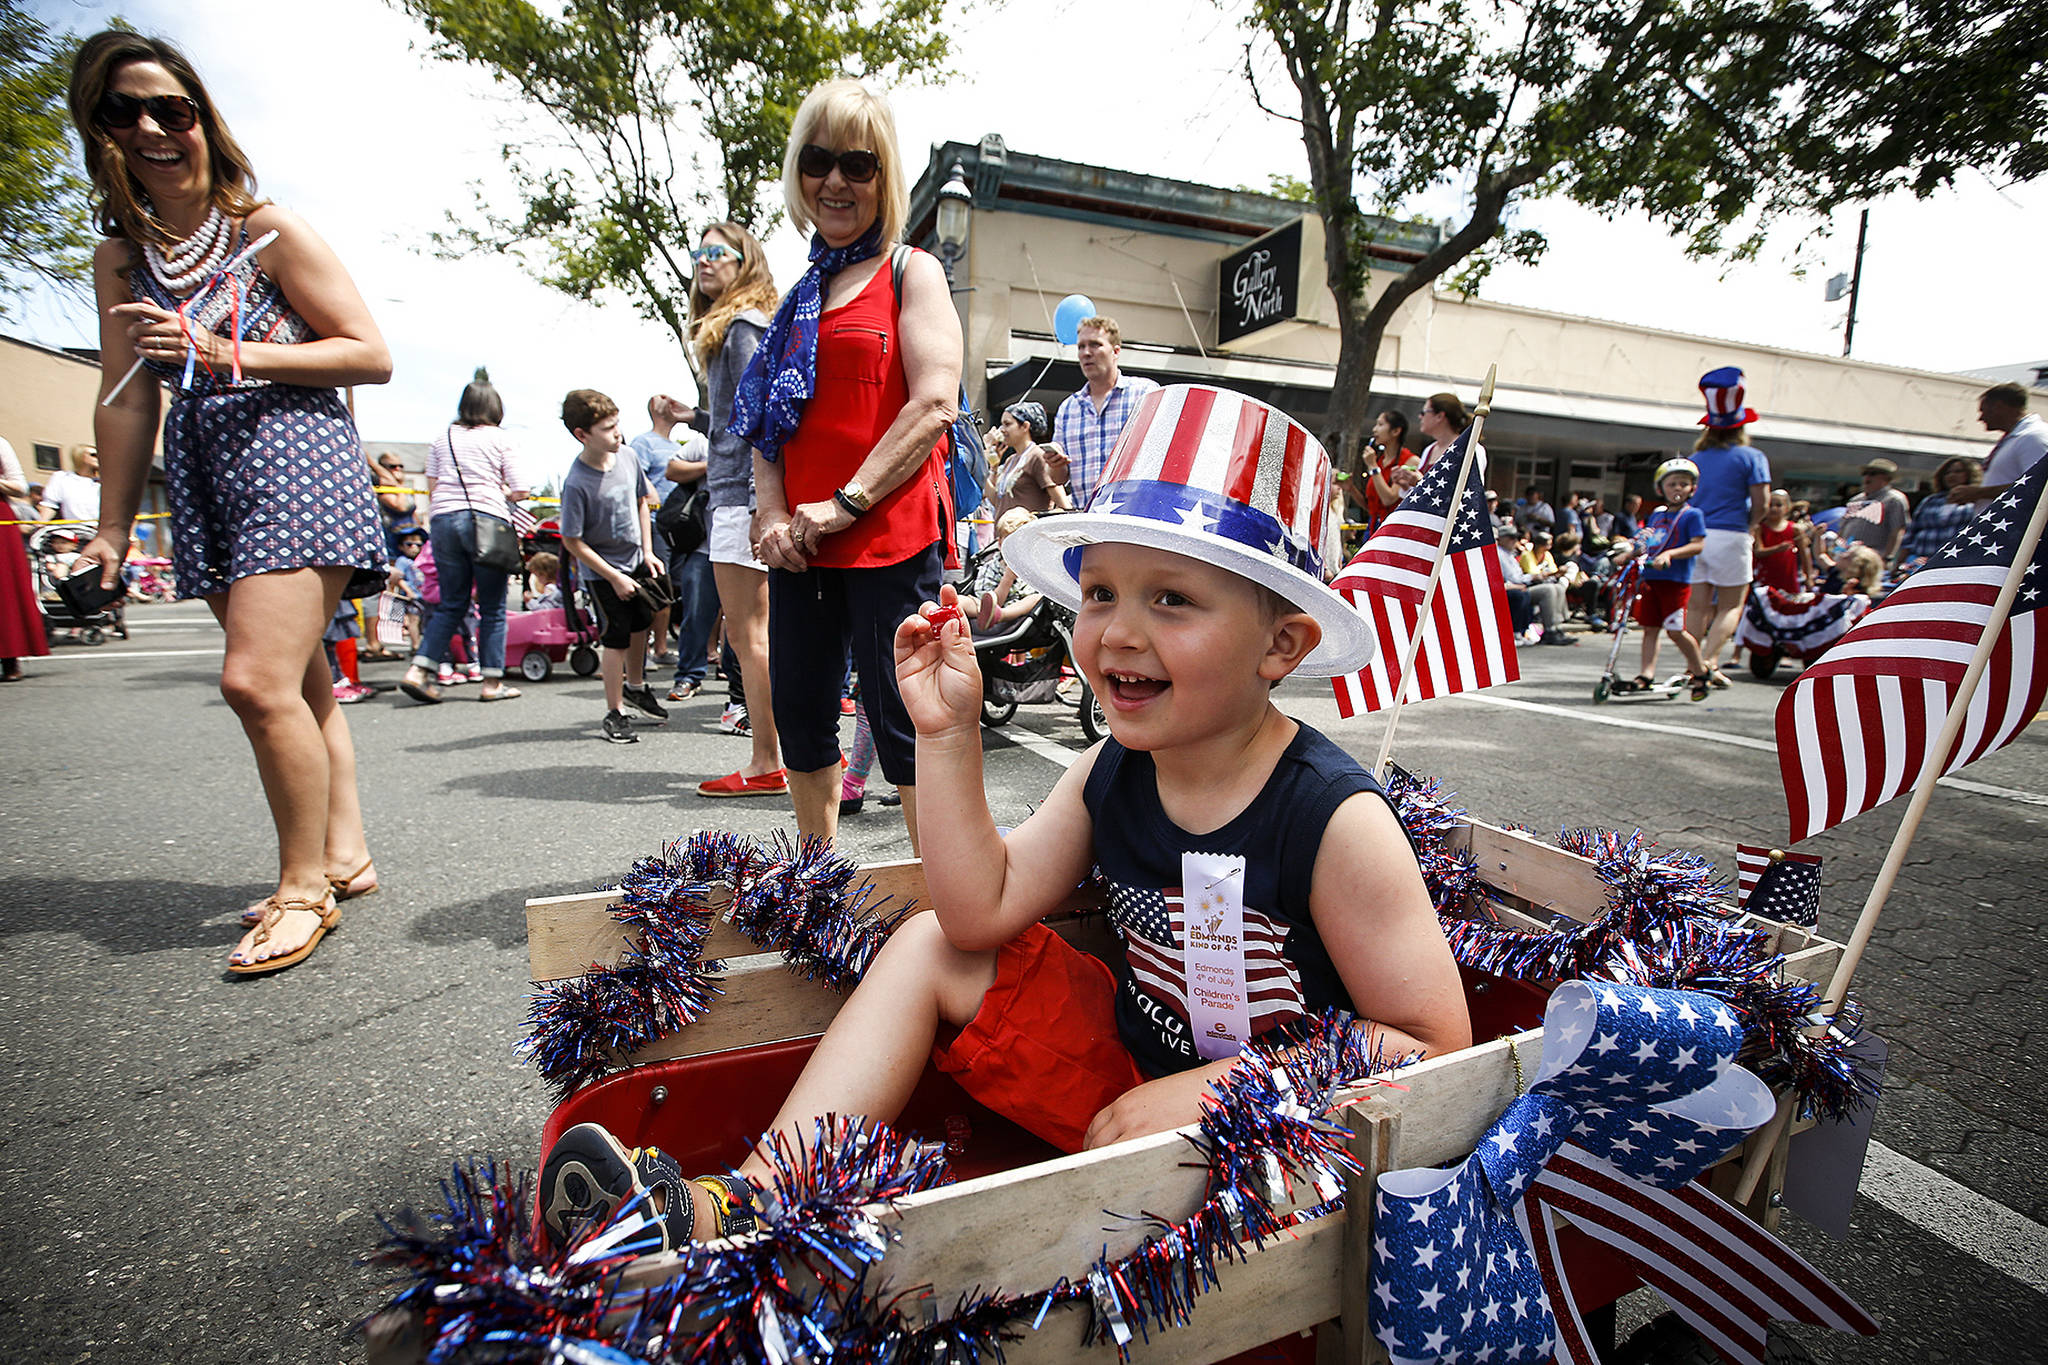 Jackson Emerick, of Shoreline, tosses candy out to crowds lining Main Street in downtown Edmonds during the Edmonds Kind of Fourth Parade in 2017. (Ian Terry / Herald file)